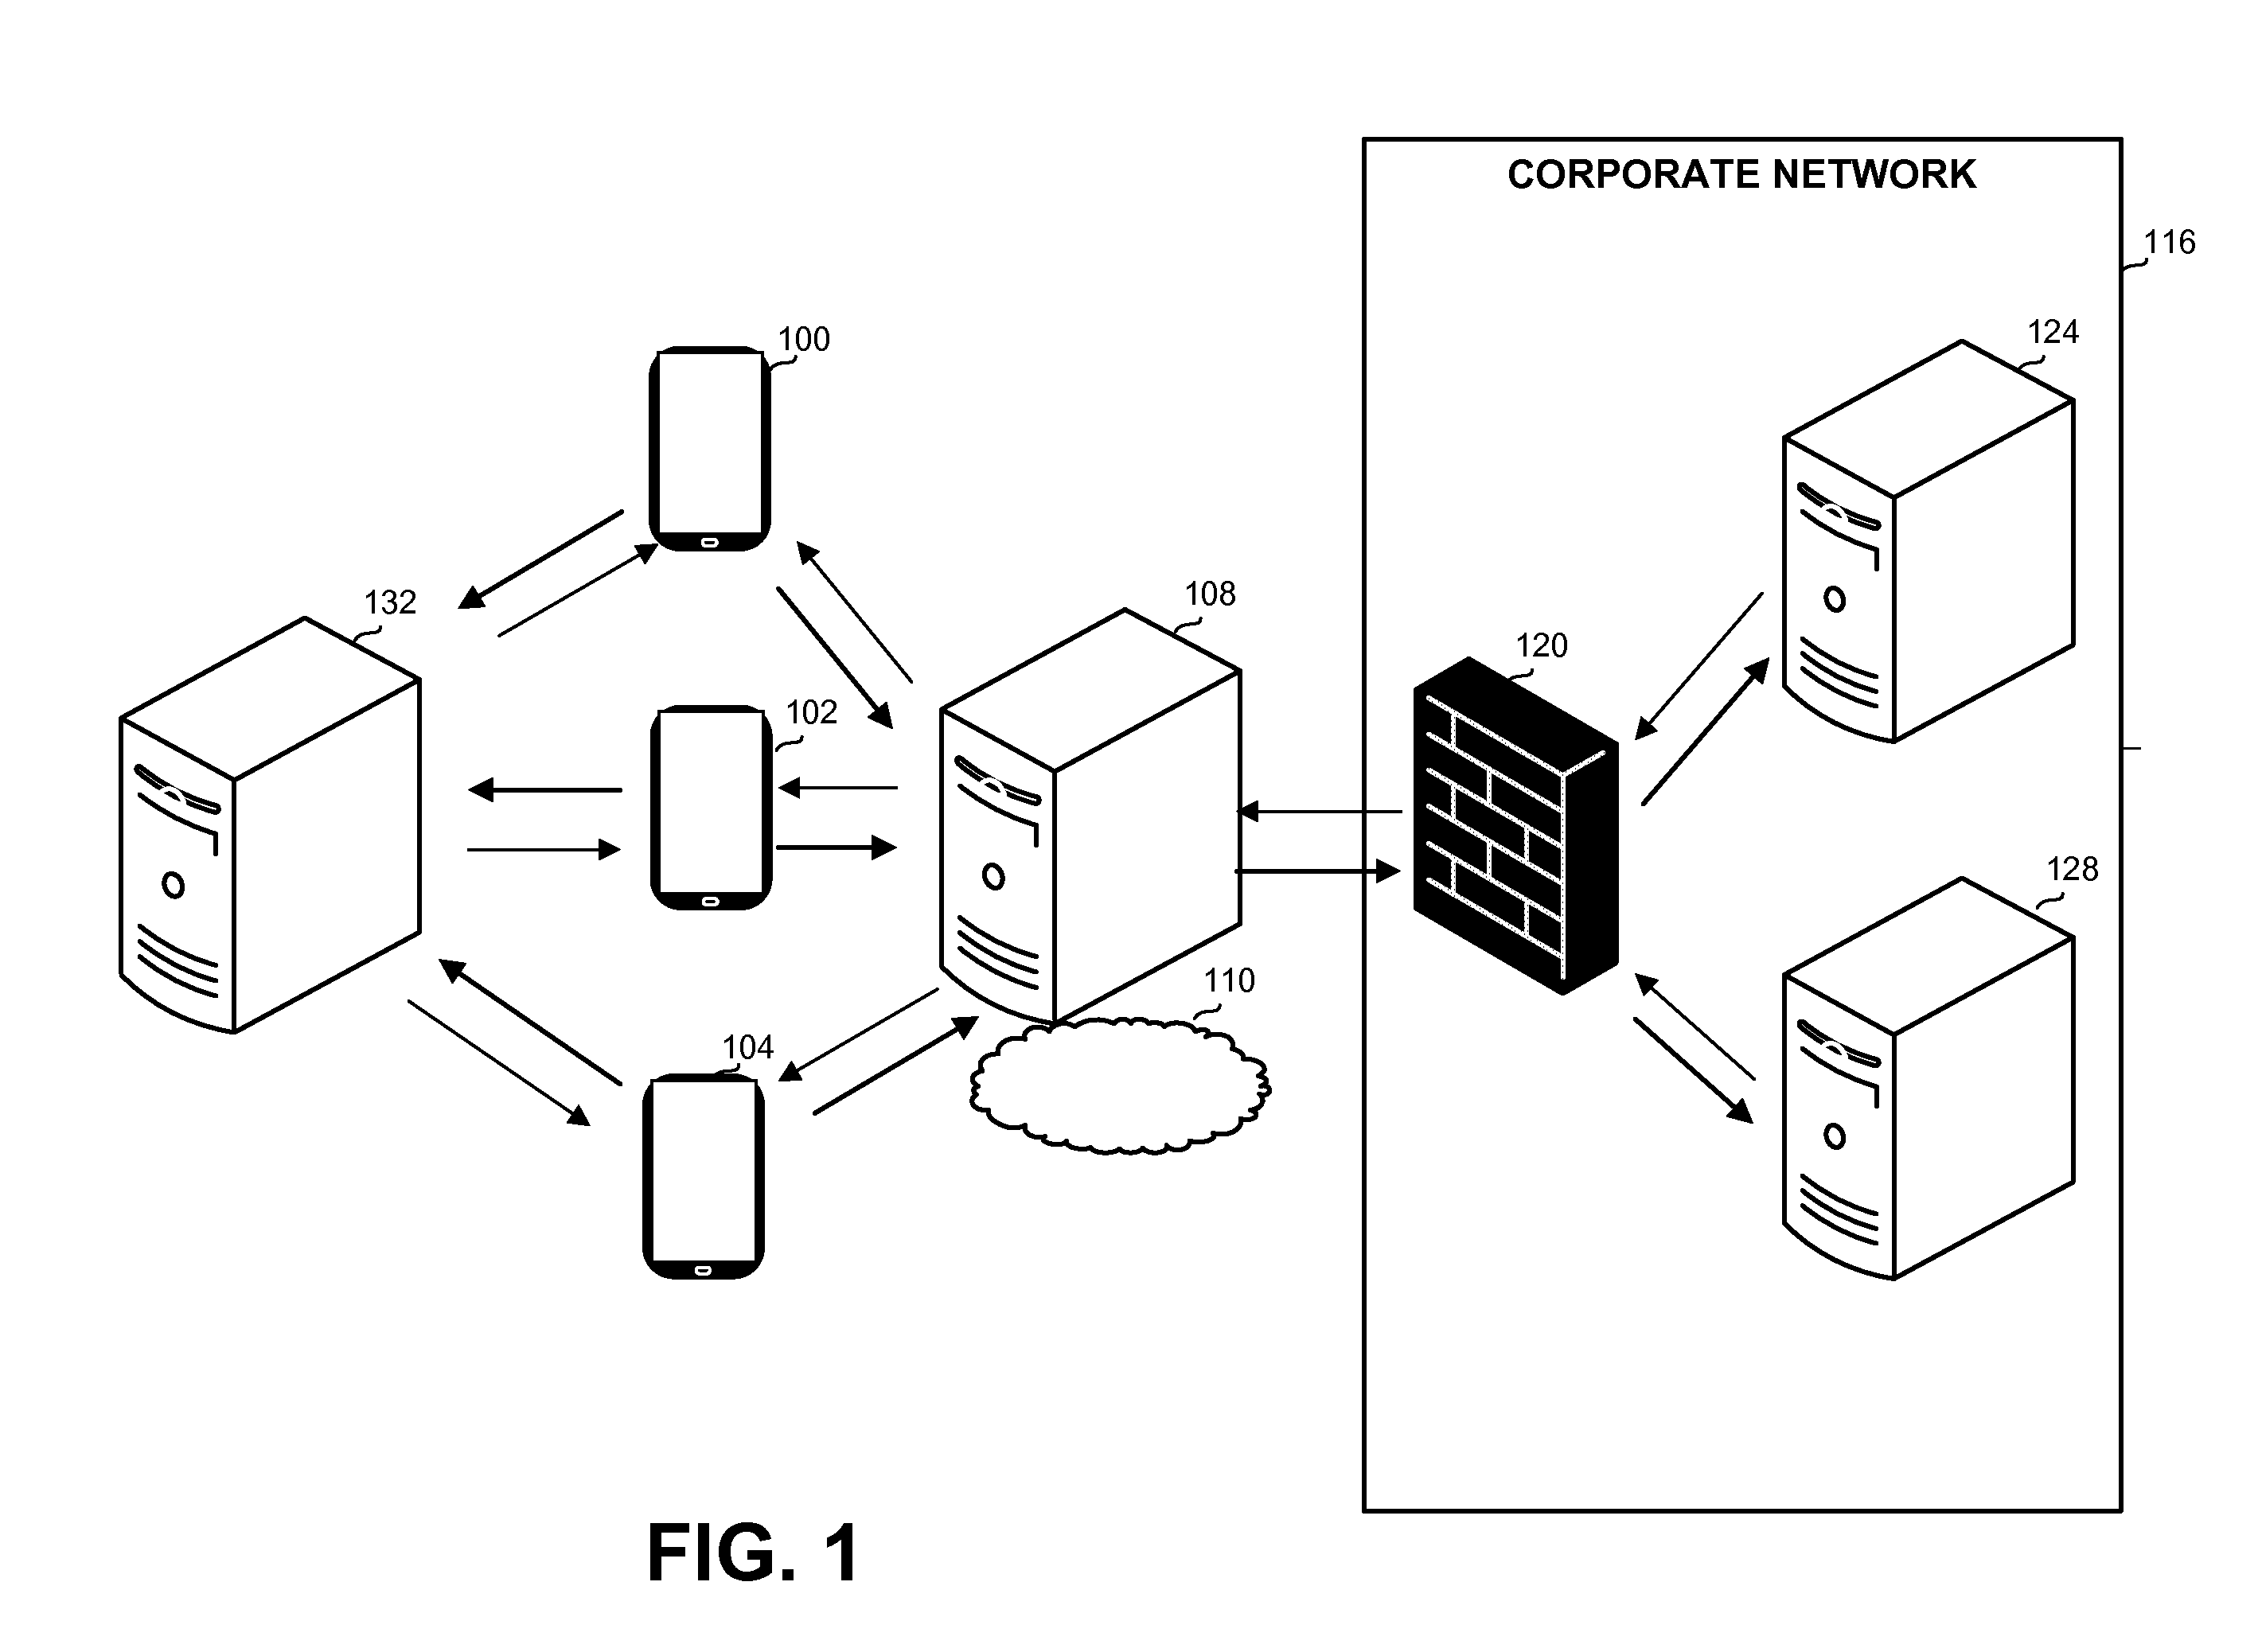 Method and Apparatus for Accessing Corporate Data from a Mobile Device